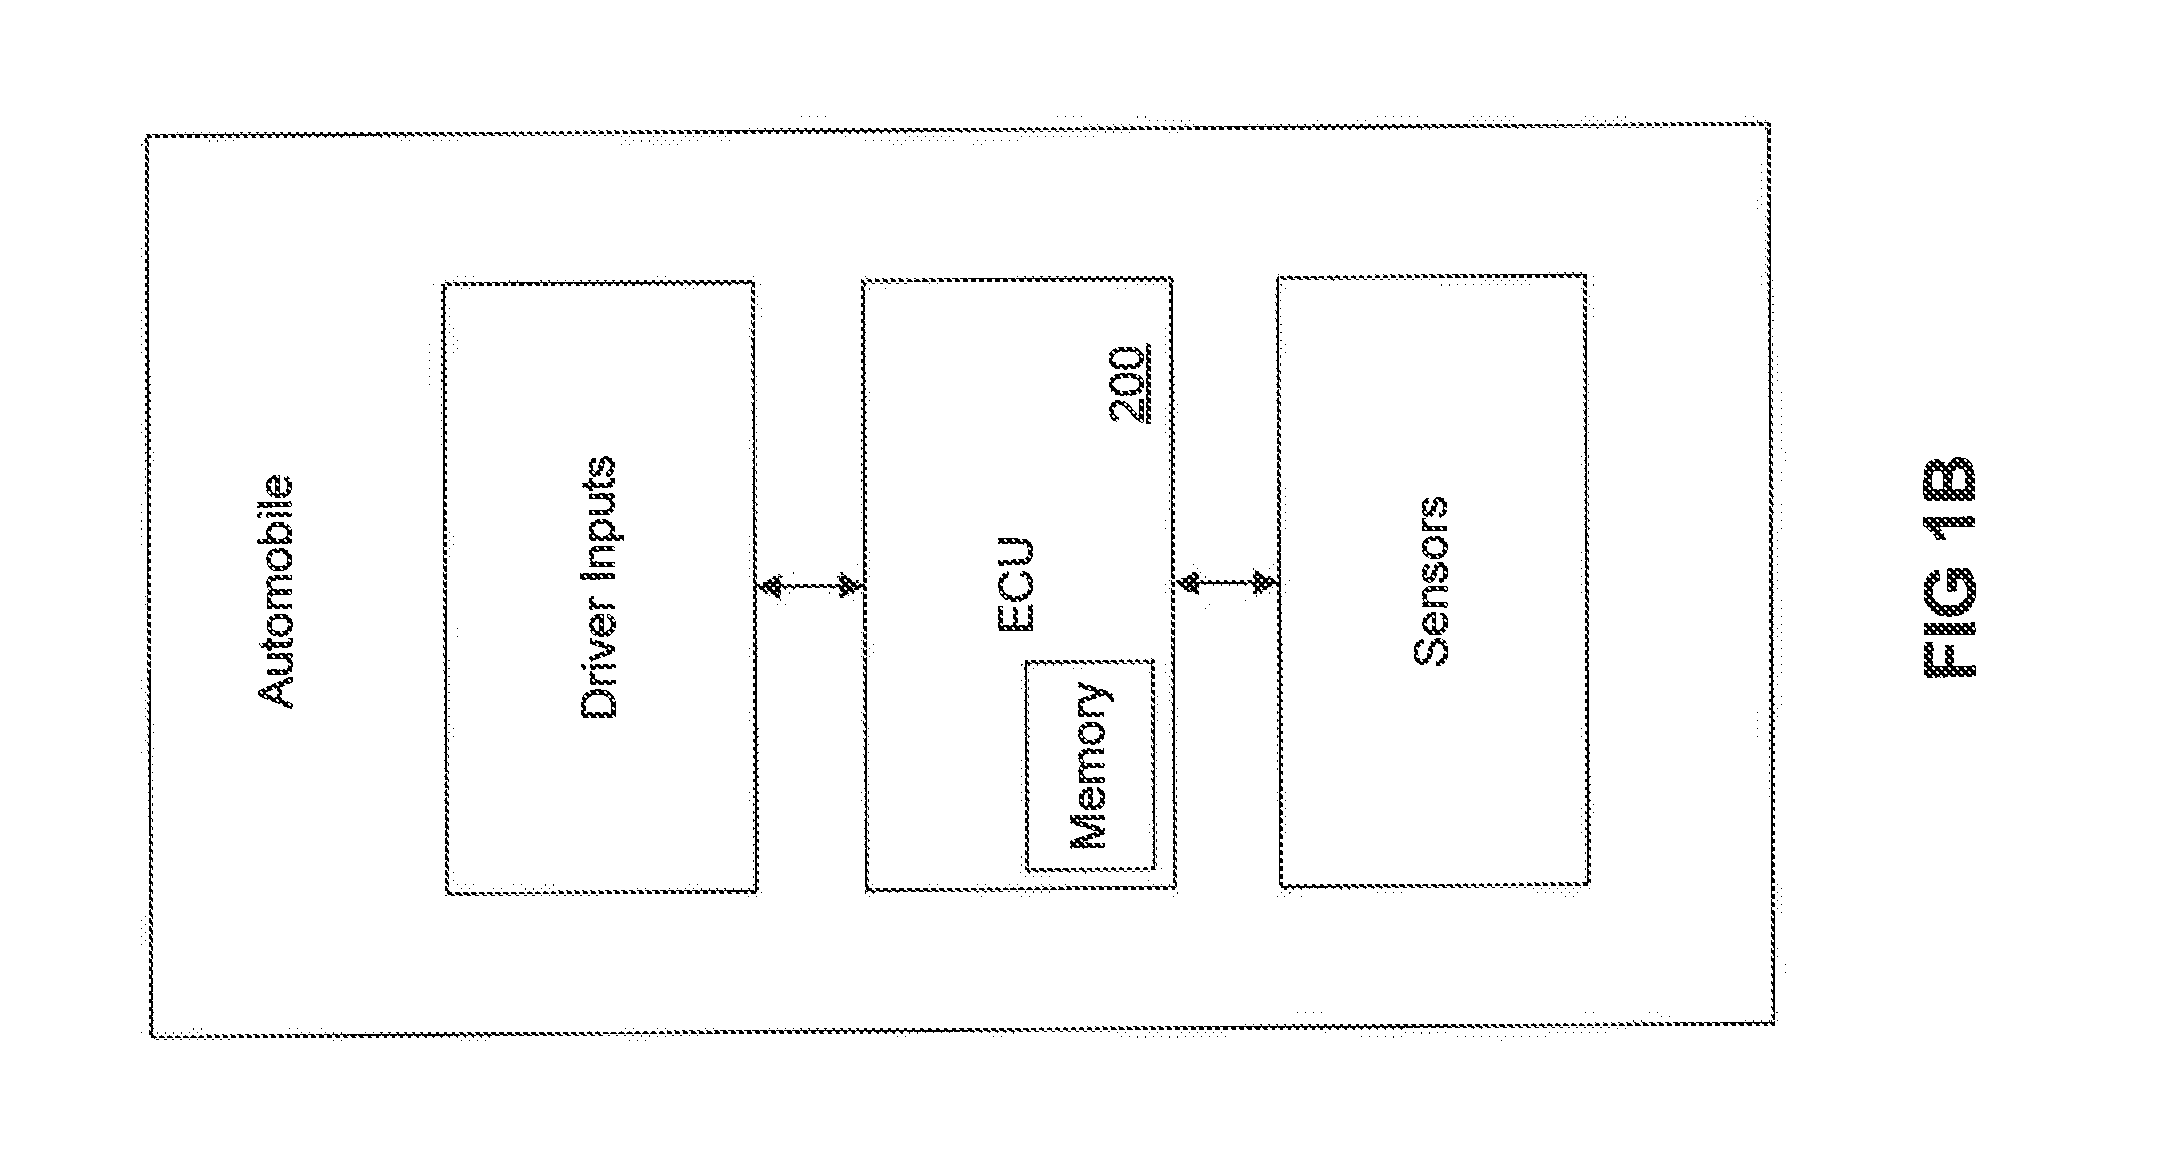 Method for validation of a graphically based executable control specification using model extraction